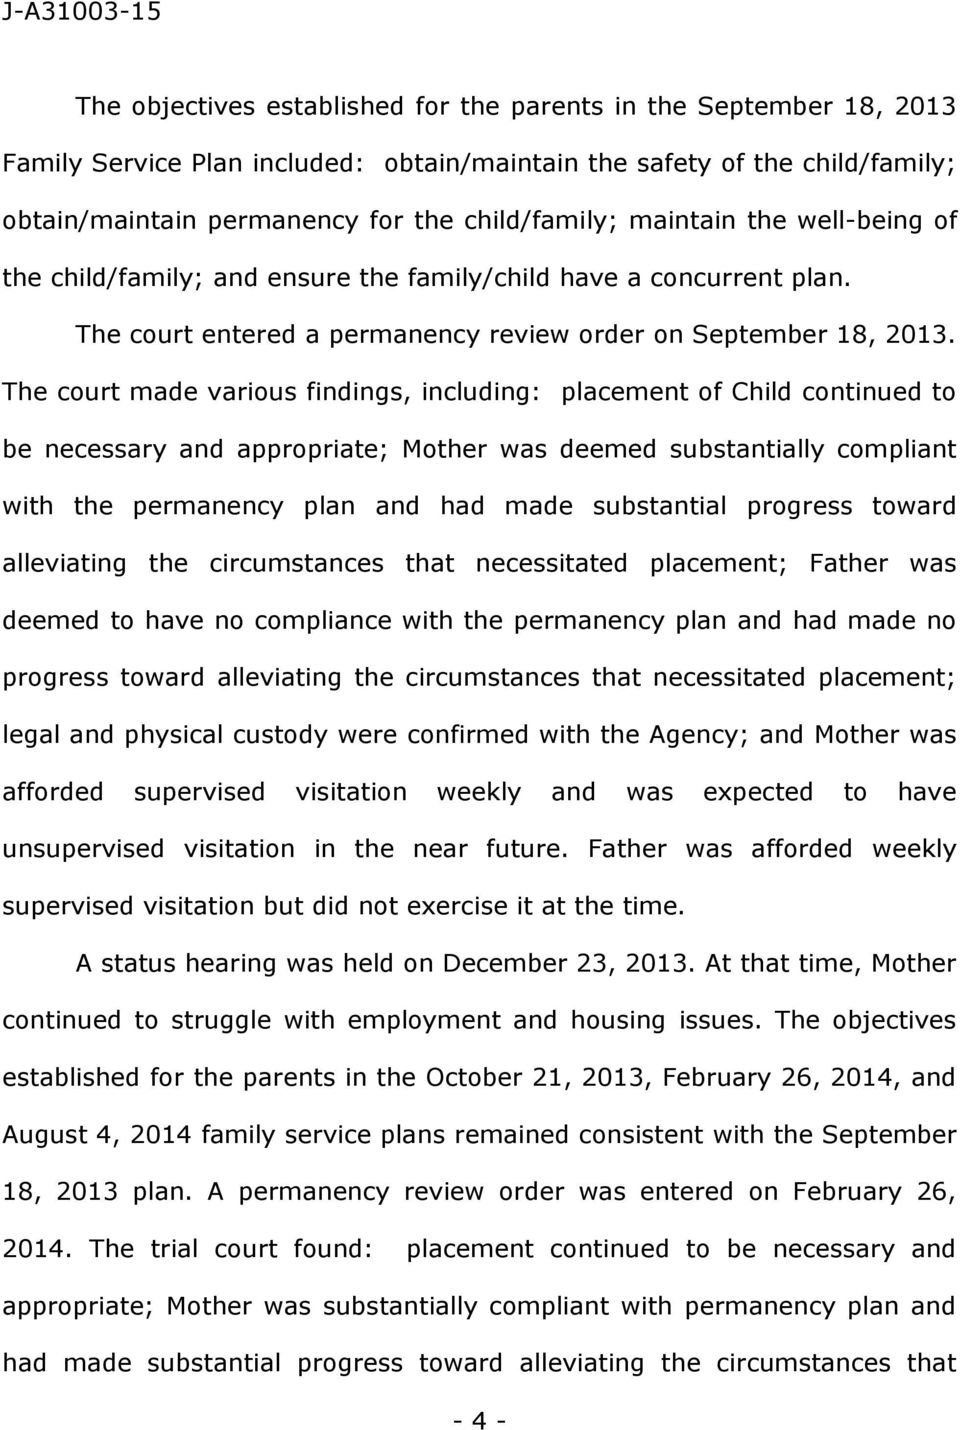 The court made various findings, including: placement of Child continued to be necessary and appropriate; Mother was deemed substantially compliant with the permanency plan and had made substantial